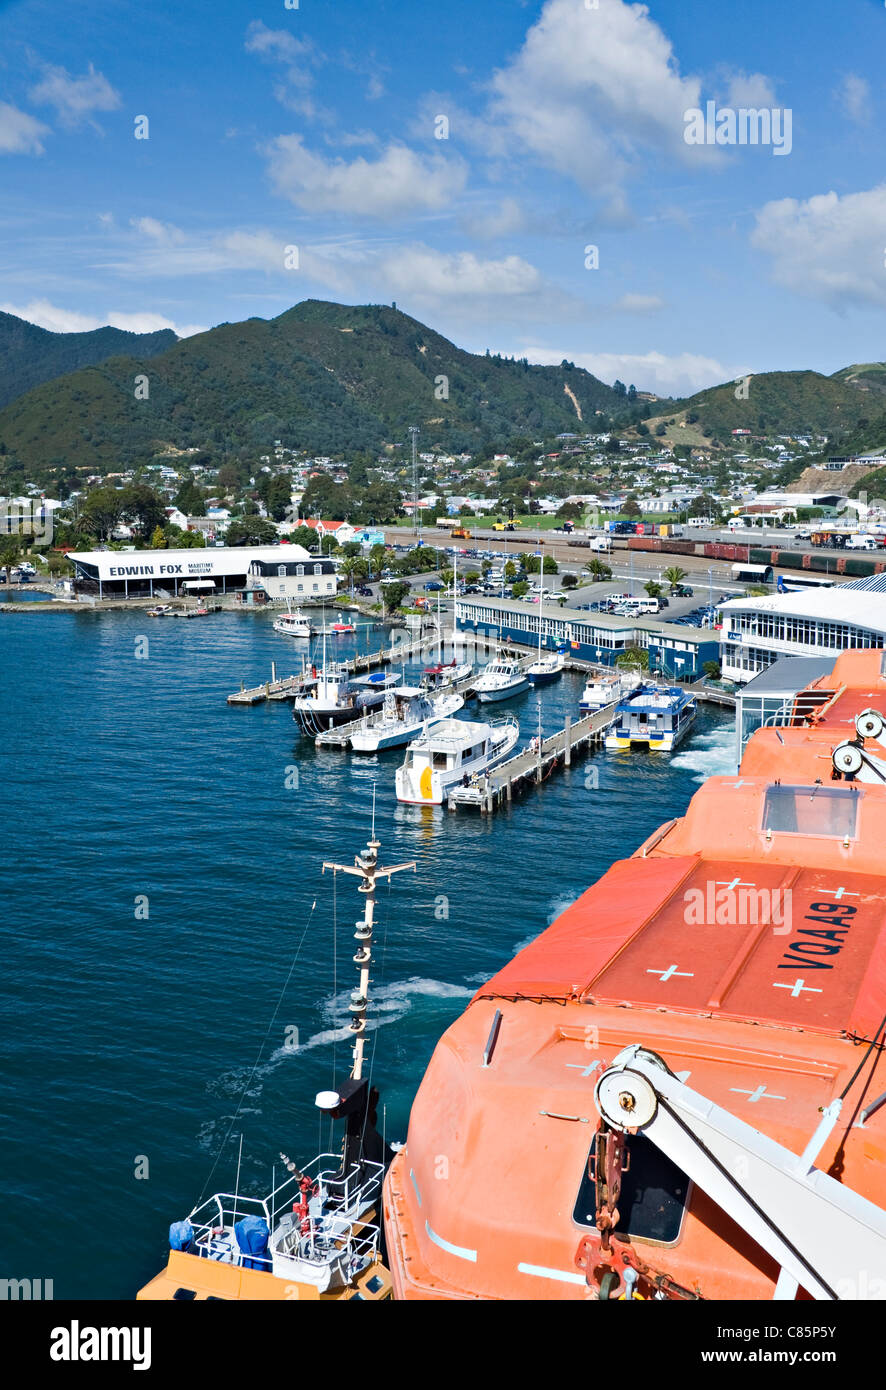 Car and Passenger Ferry Docking at Picton with Tug Assistance South Island New Zealand Stock Photo